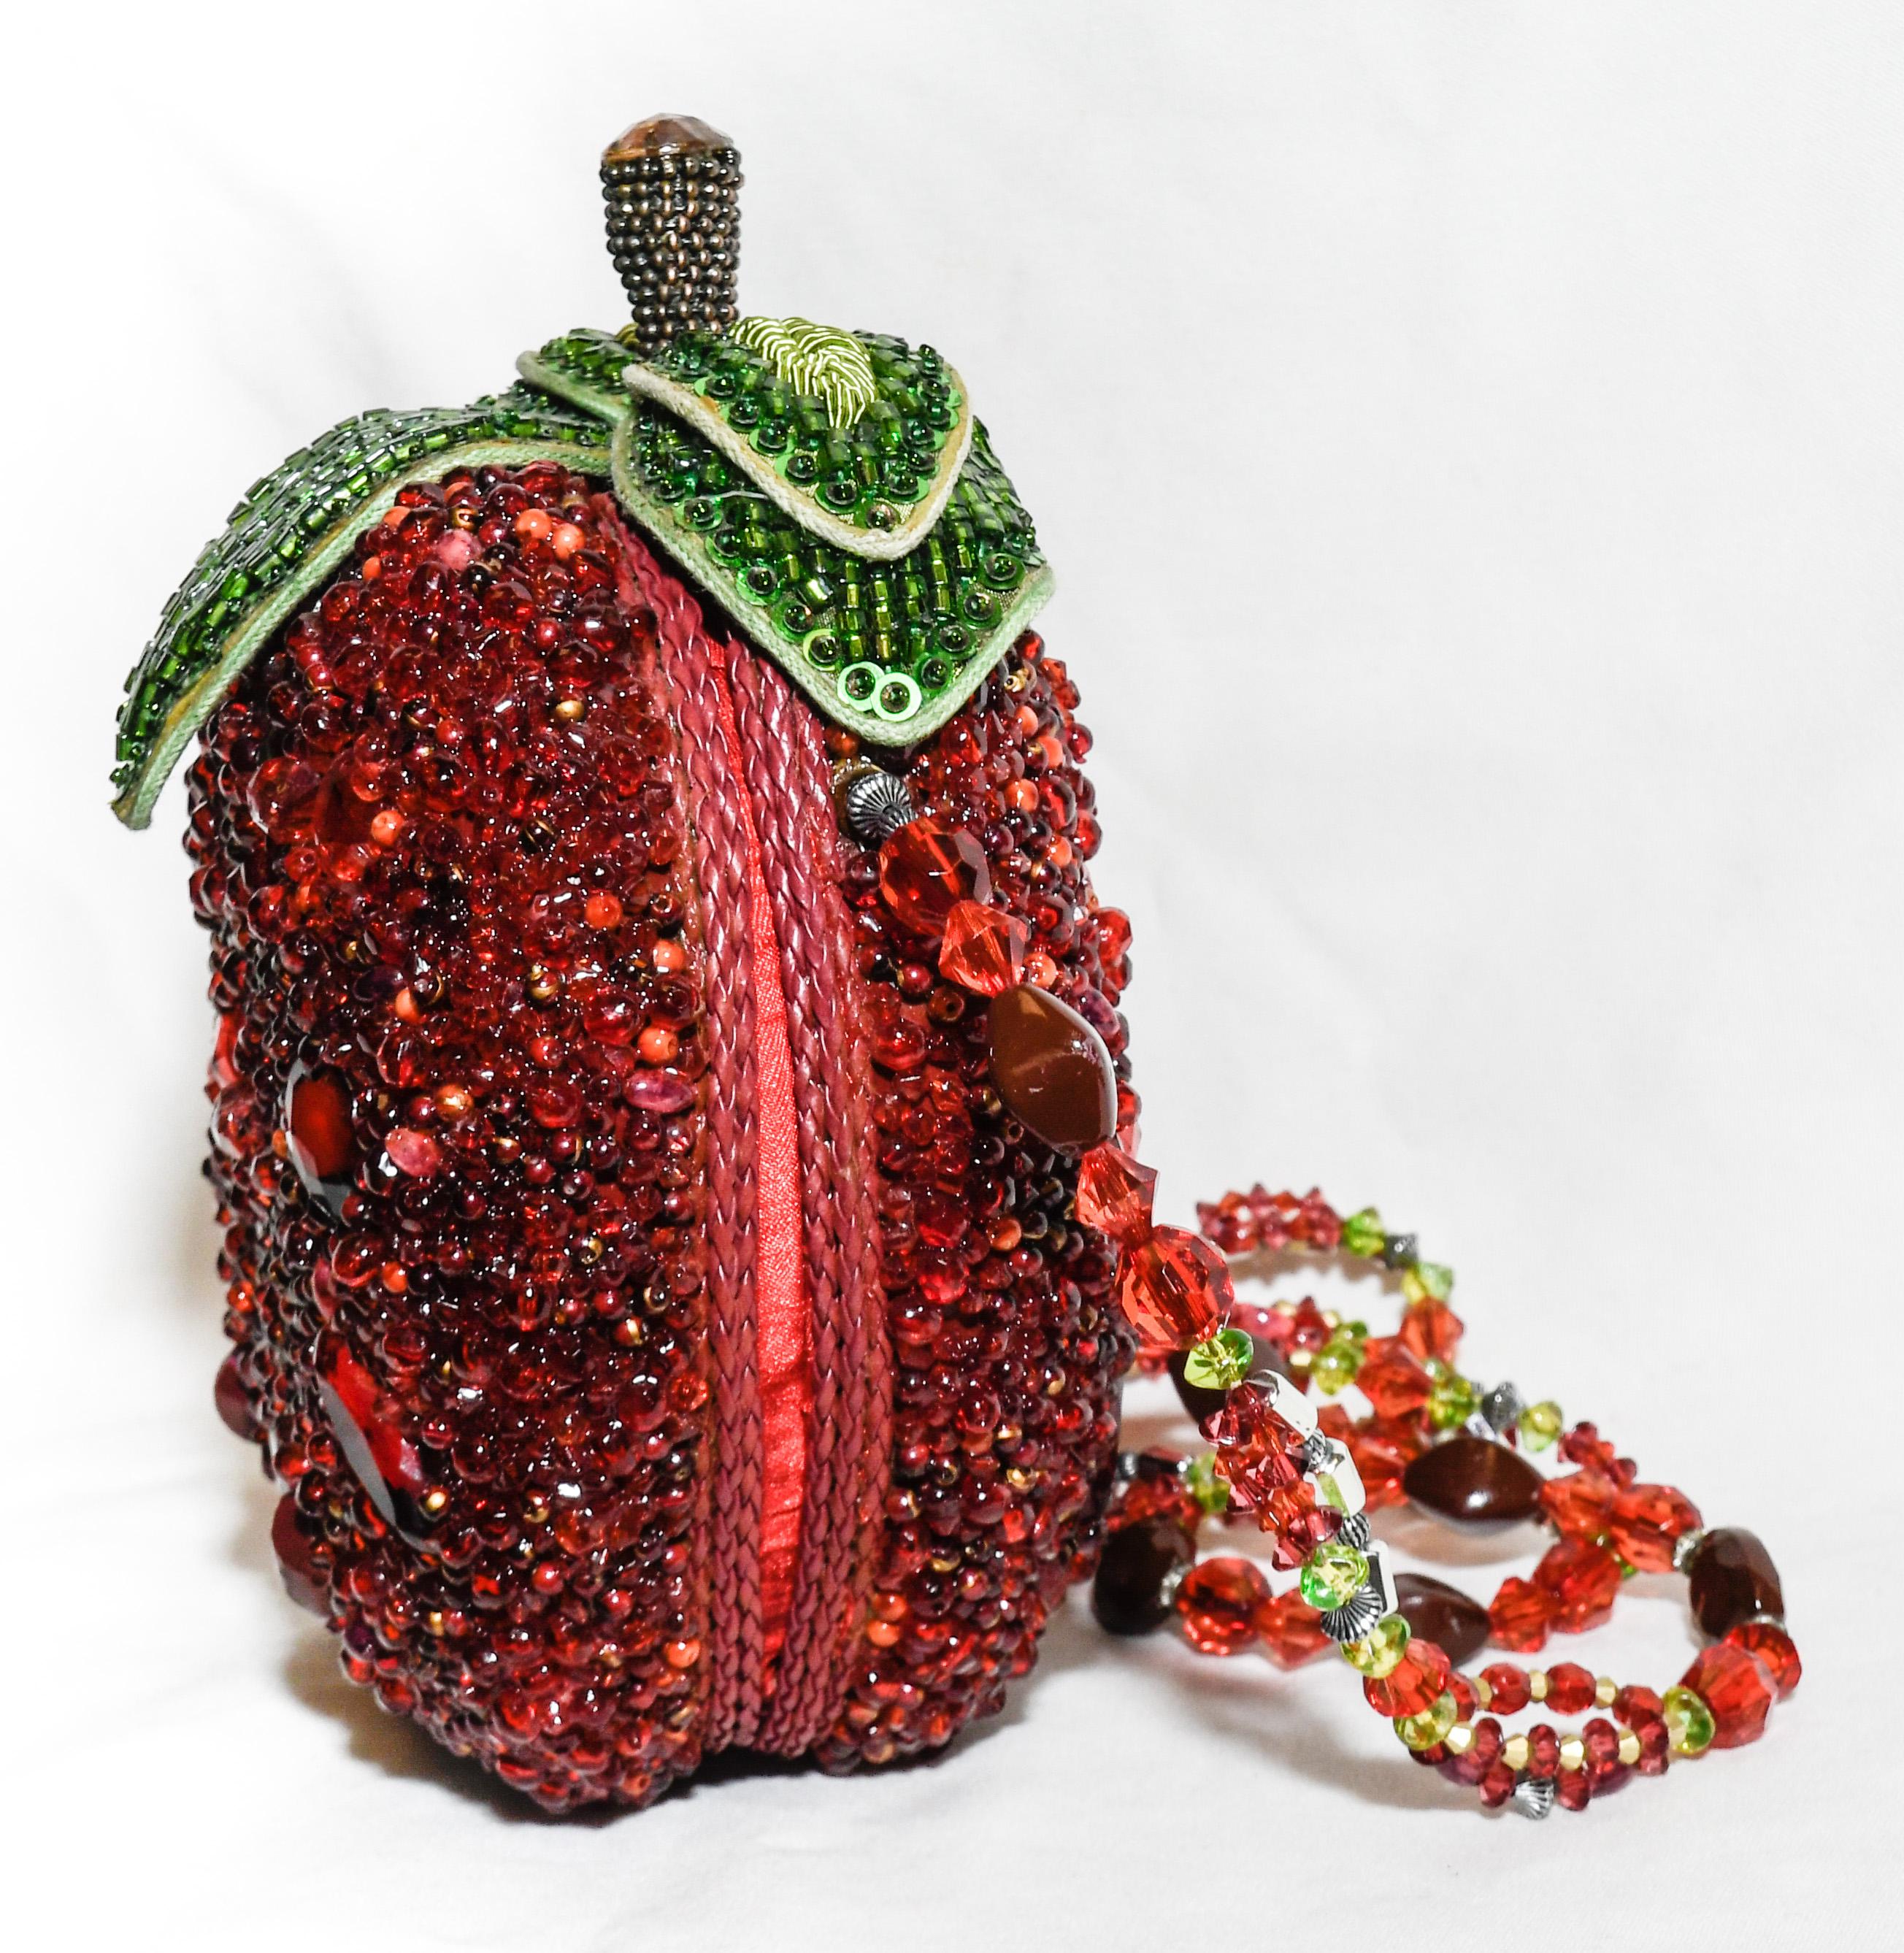 Mary Frances candy apple red shoulder bag heavily decorated with red beads fuse whimsy with elegance, femininity with functionality. Richly embellished with opulent natural stones, rhinestones, studs, beads, crystals and trims from all over the